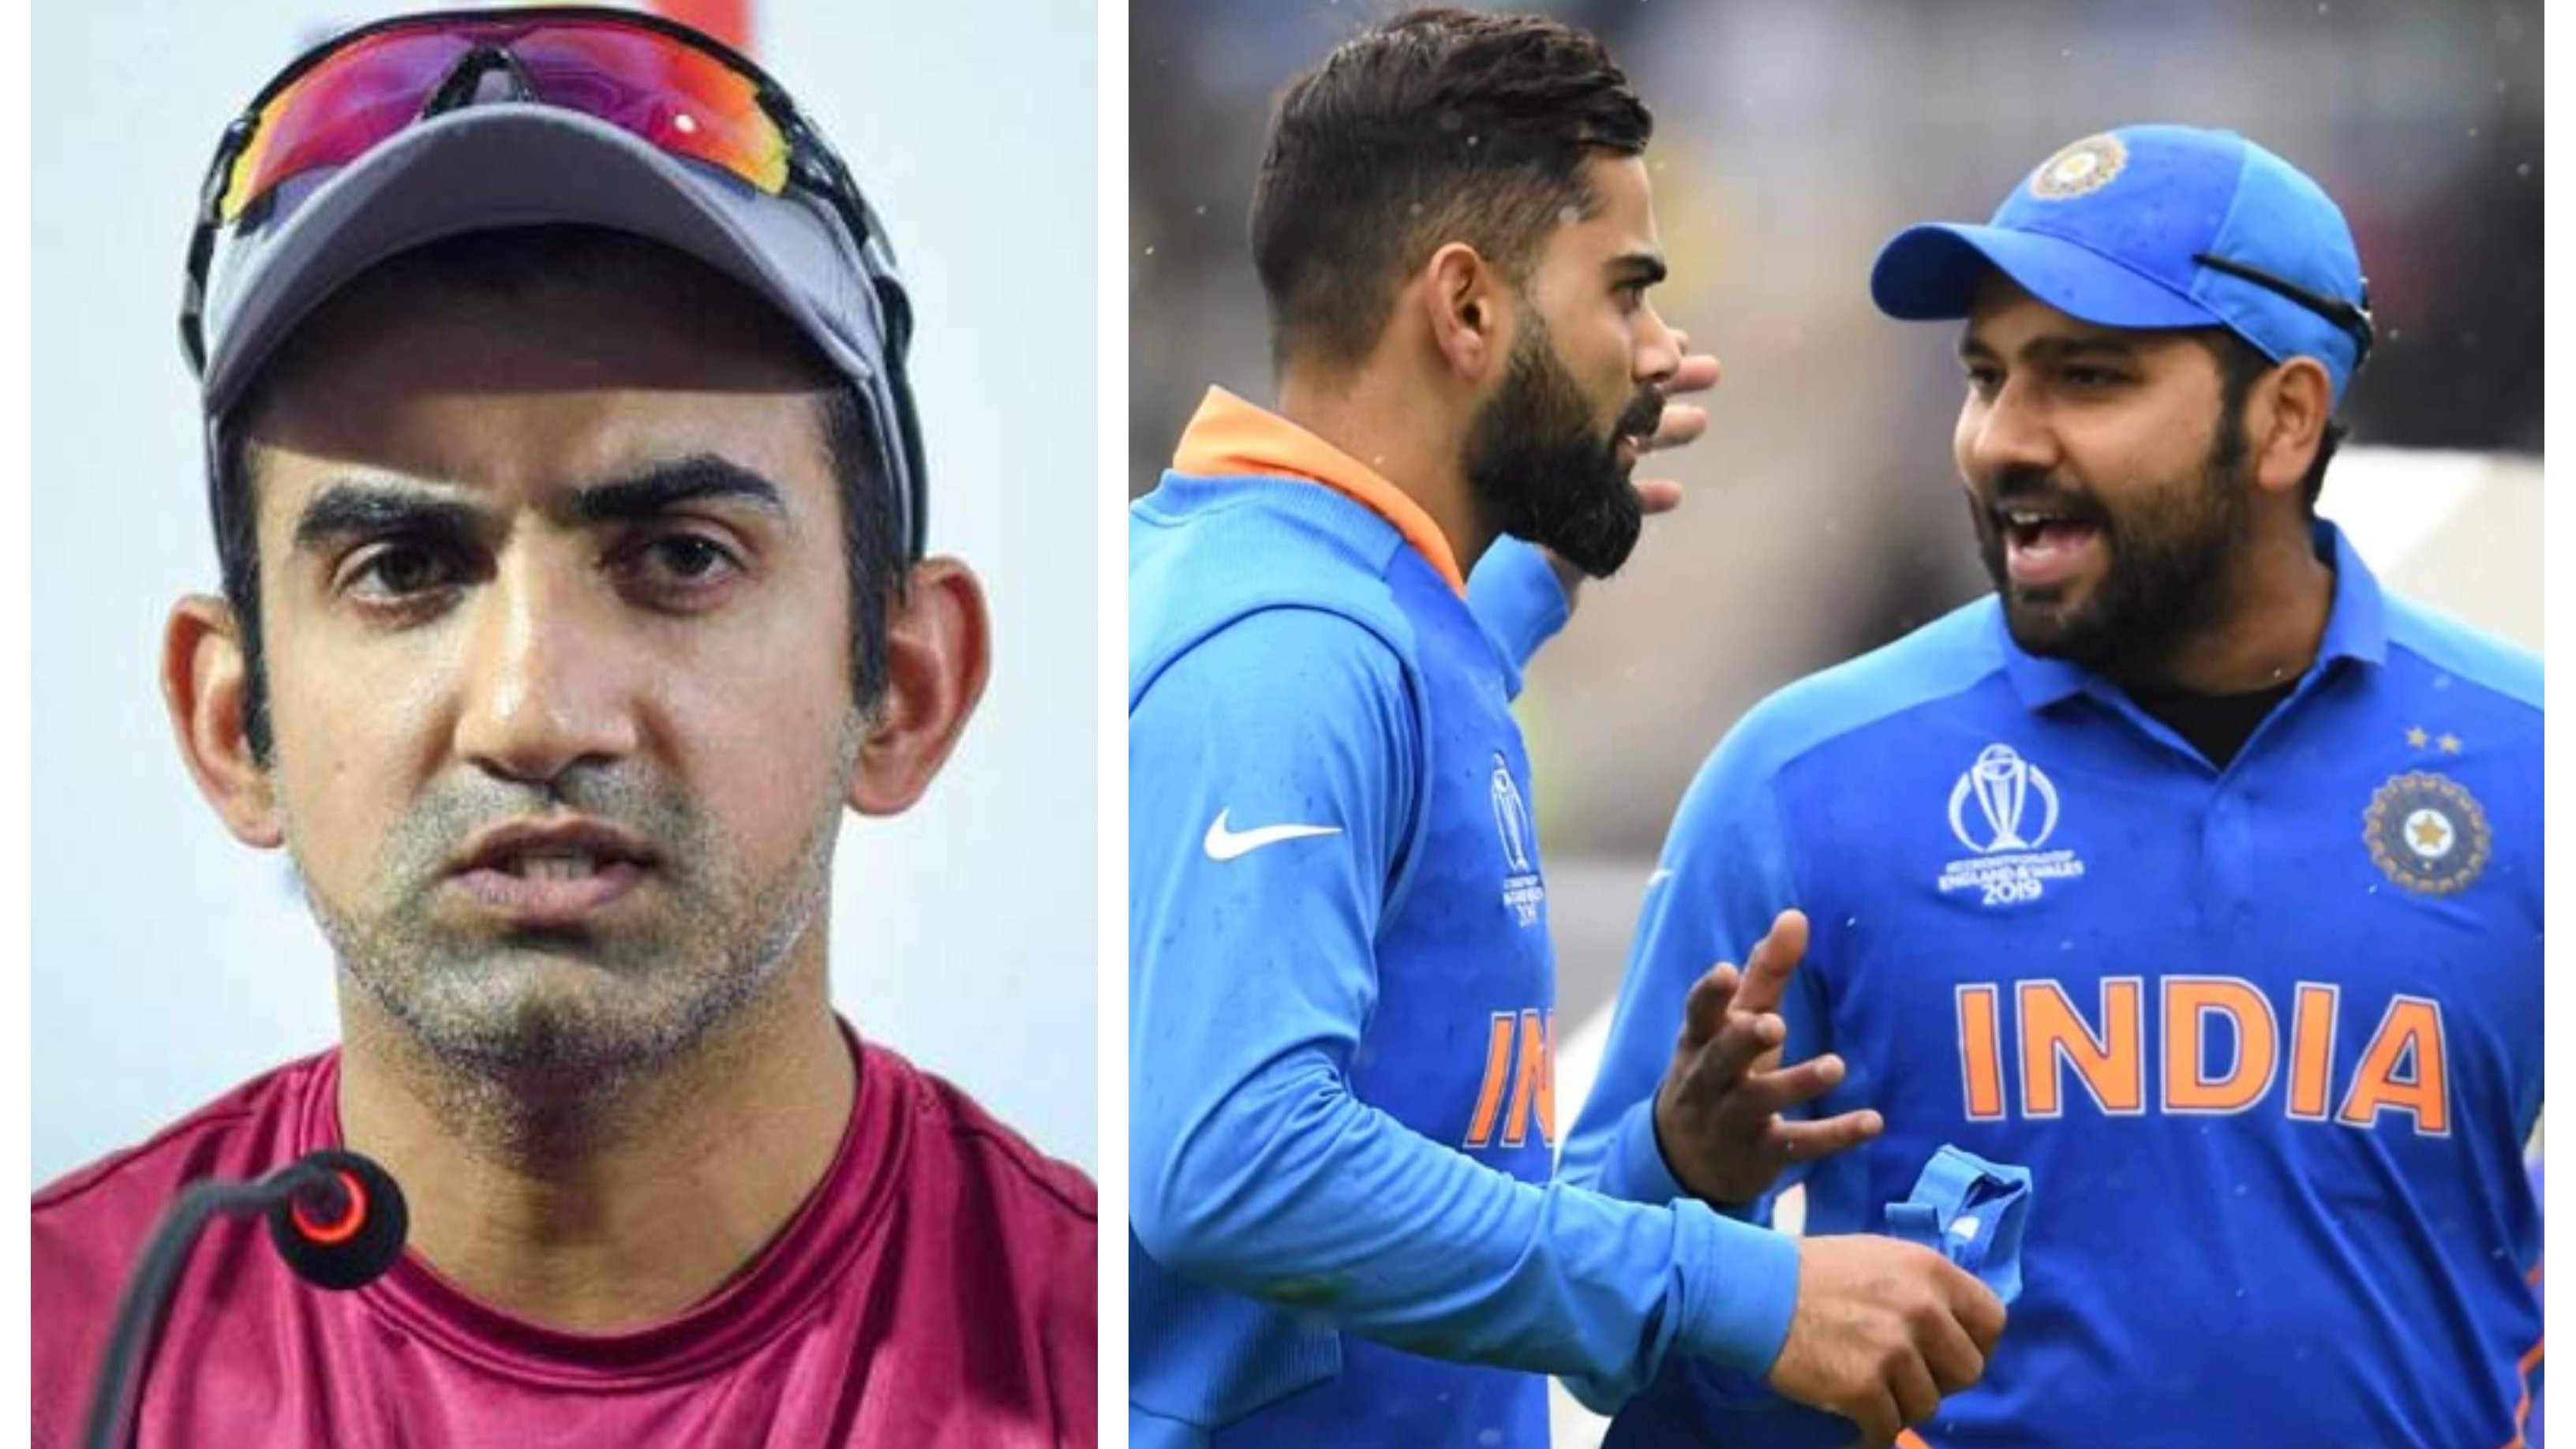 ‘There is a dearth of role models in the current Indian team’ – Gambhir endorses Yuvraj’s viewpoint